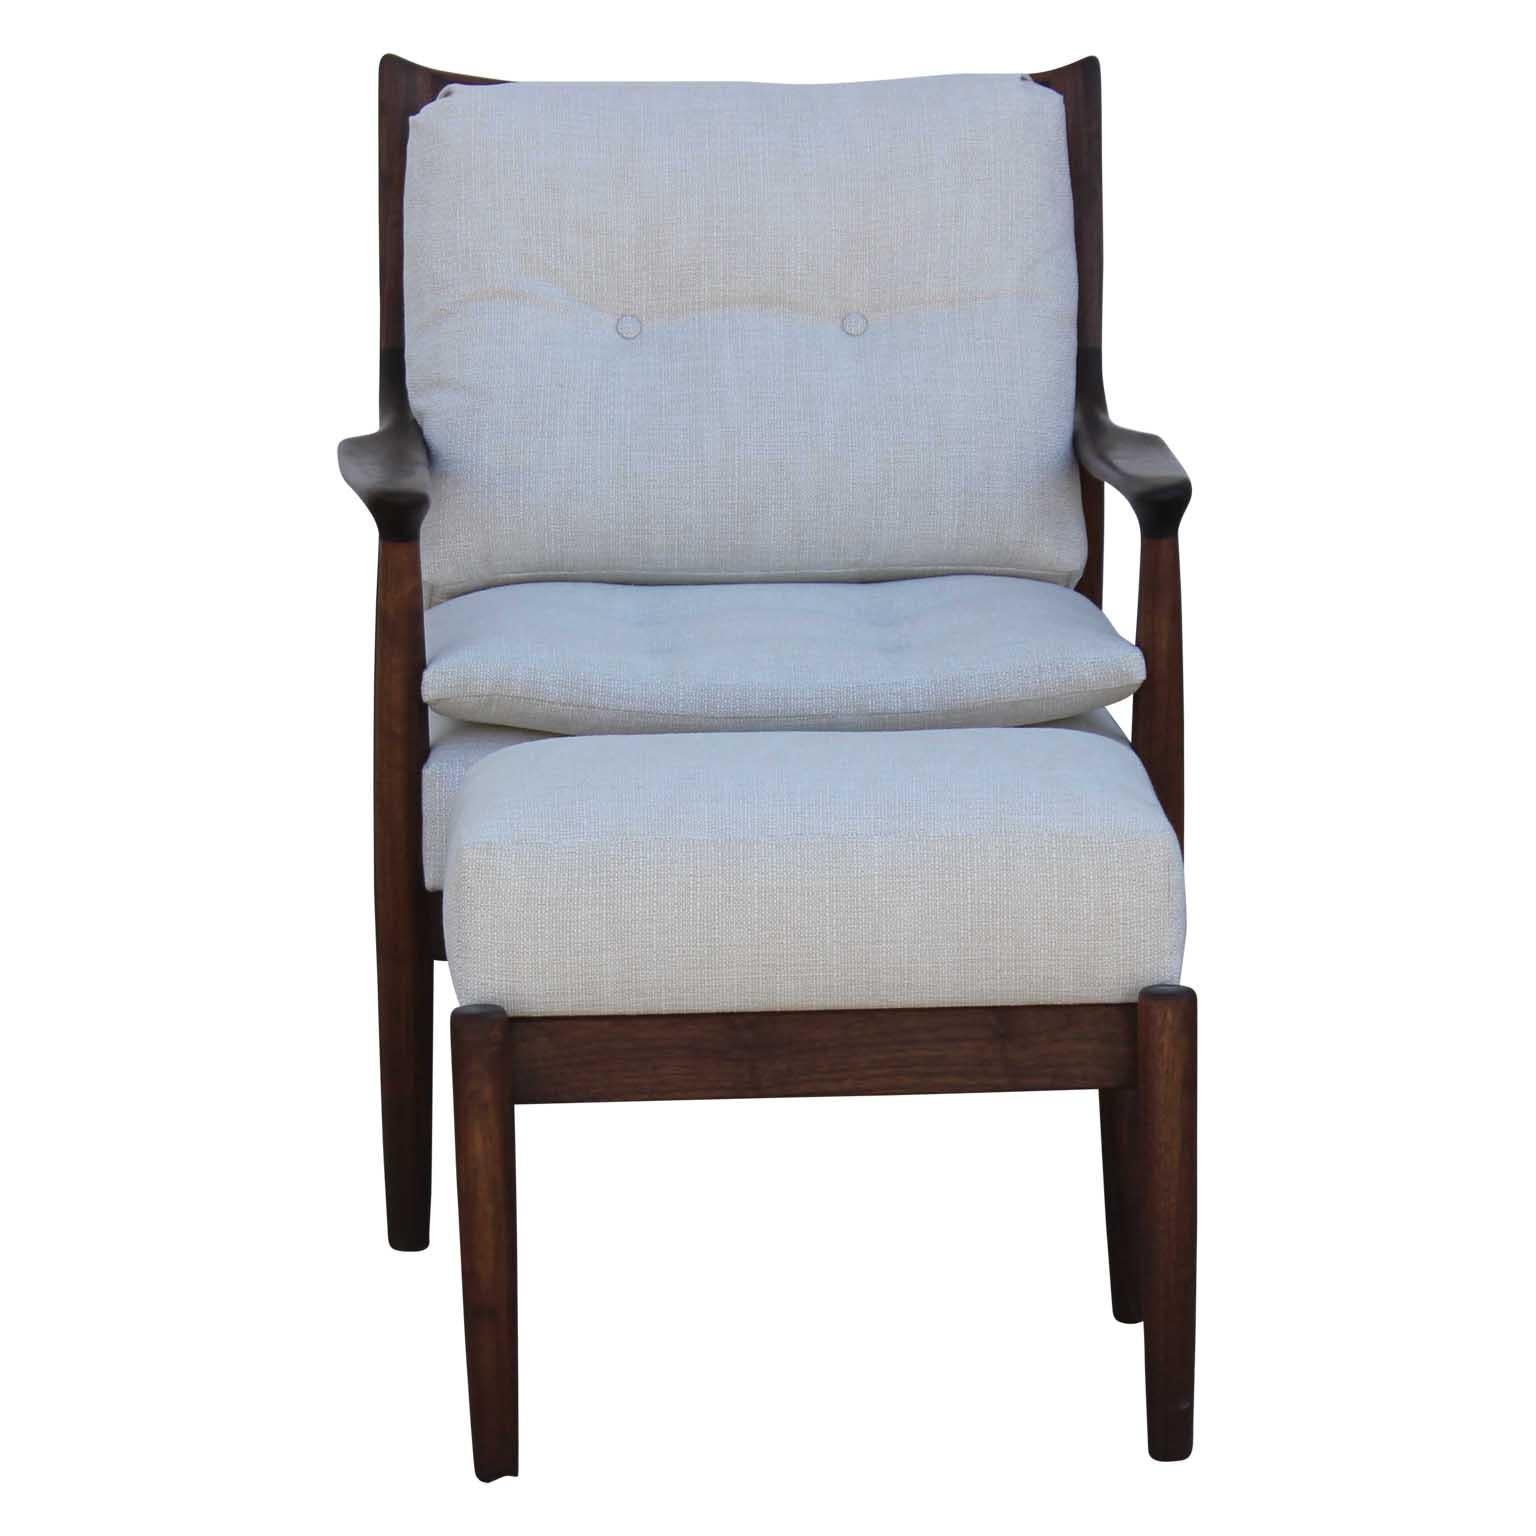 Wonderful sculptural lounge chair and ottoman expertly handcrafted by Norm Stoeker and upholstered in a nice neutral fabric. 

Dimensions of ottoman: 20.75 in. W x 17 in. D x 18 in. H